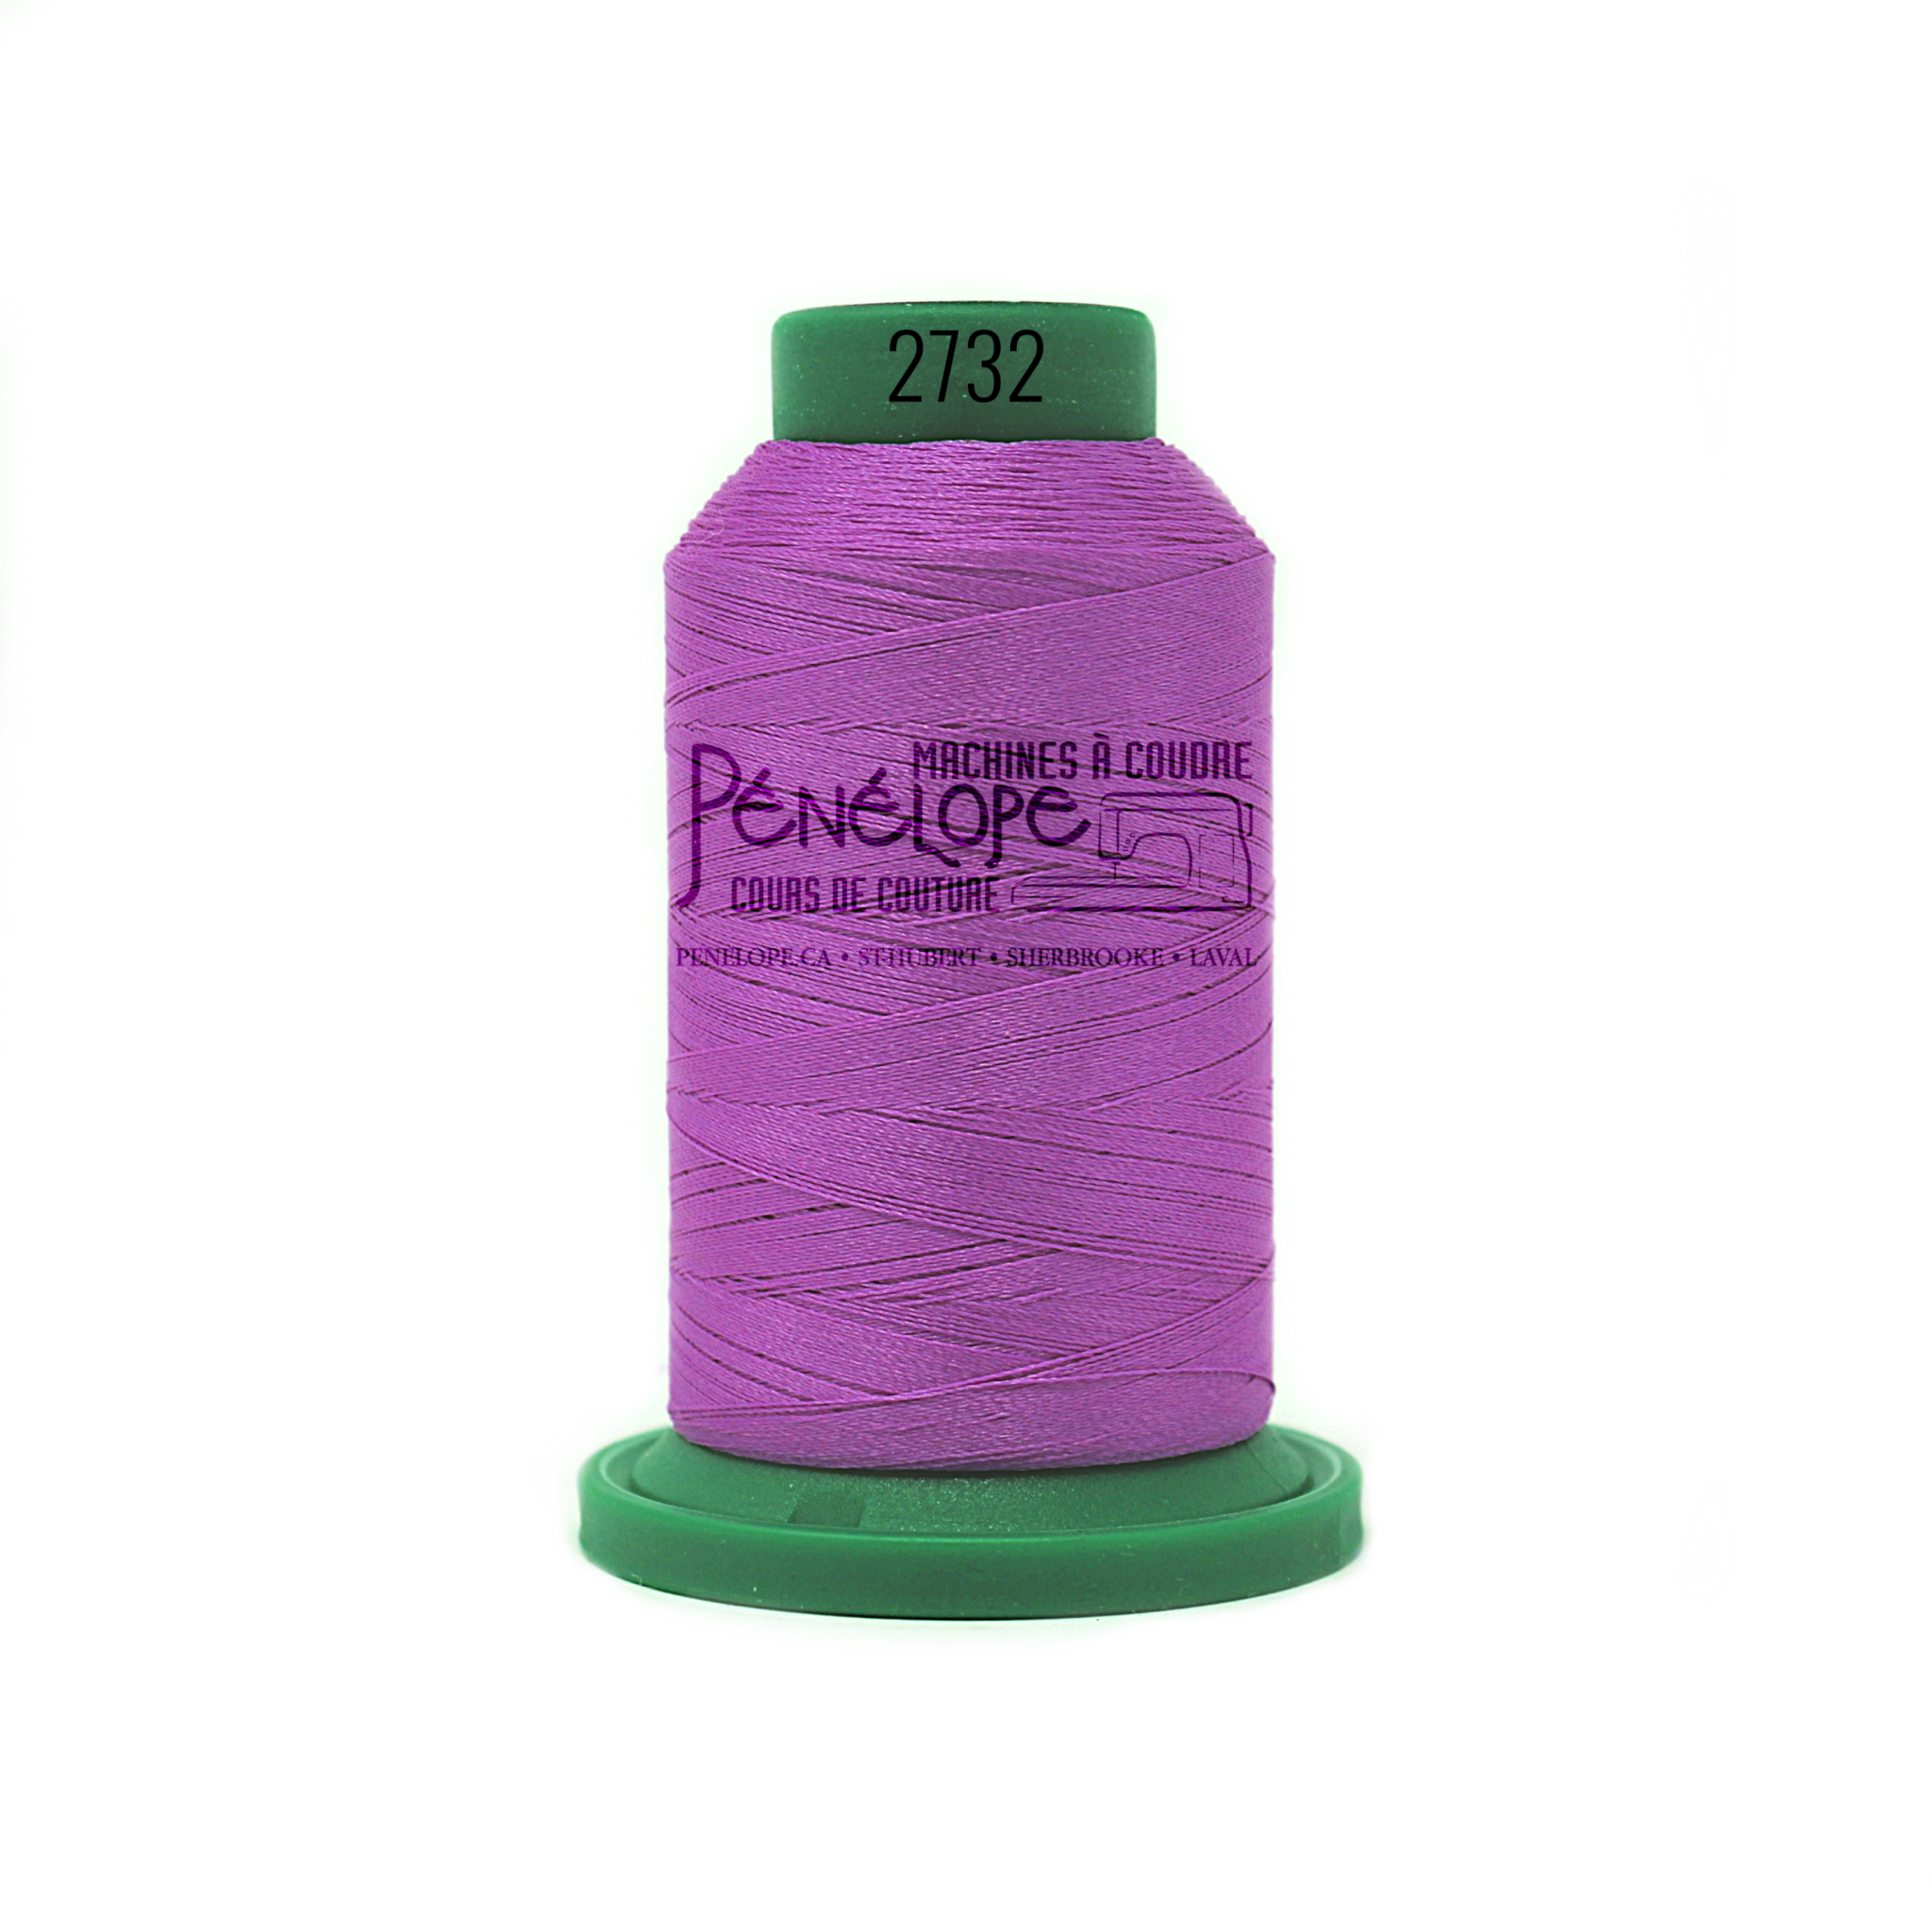 Isacord Isacord sewing and embroidery thread 2732